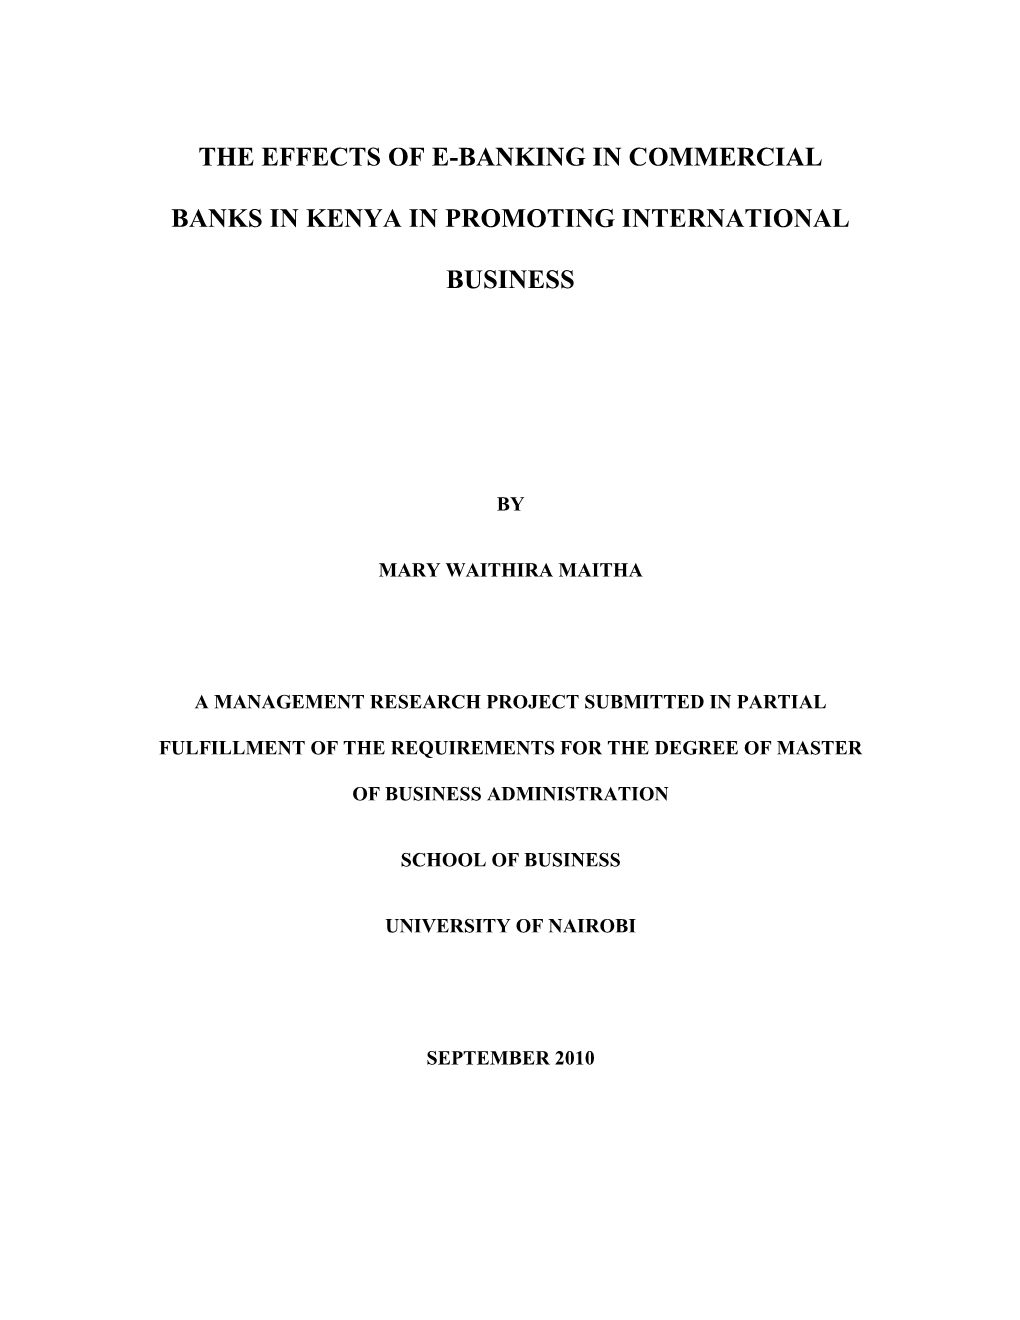 The Effects of E-Banking in Commercial Banks in Kenya in Promoting International Business.”